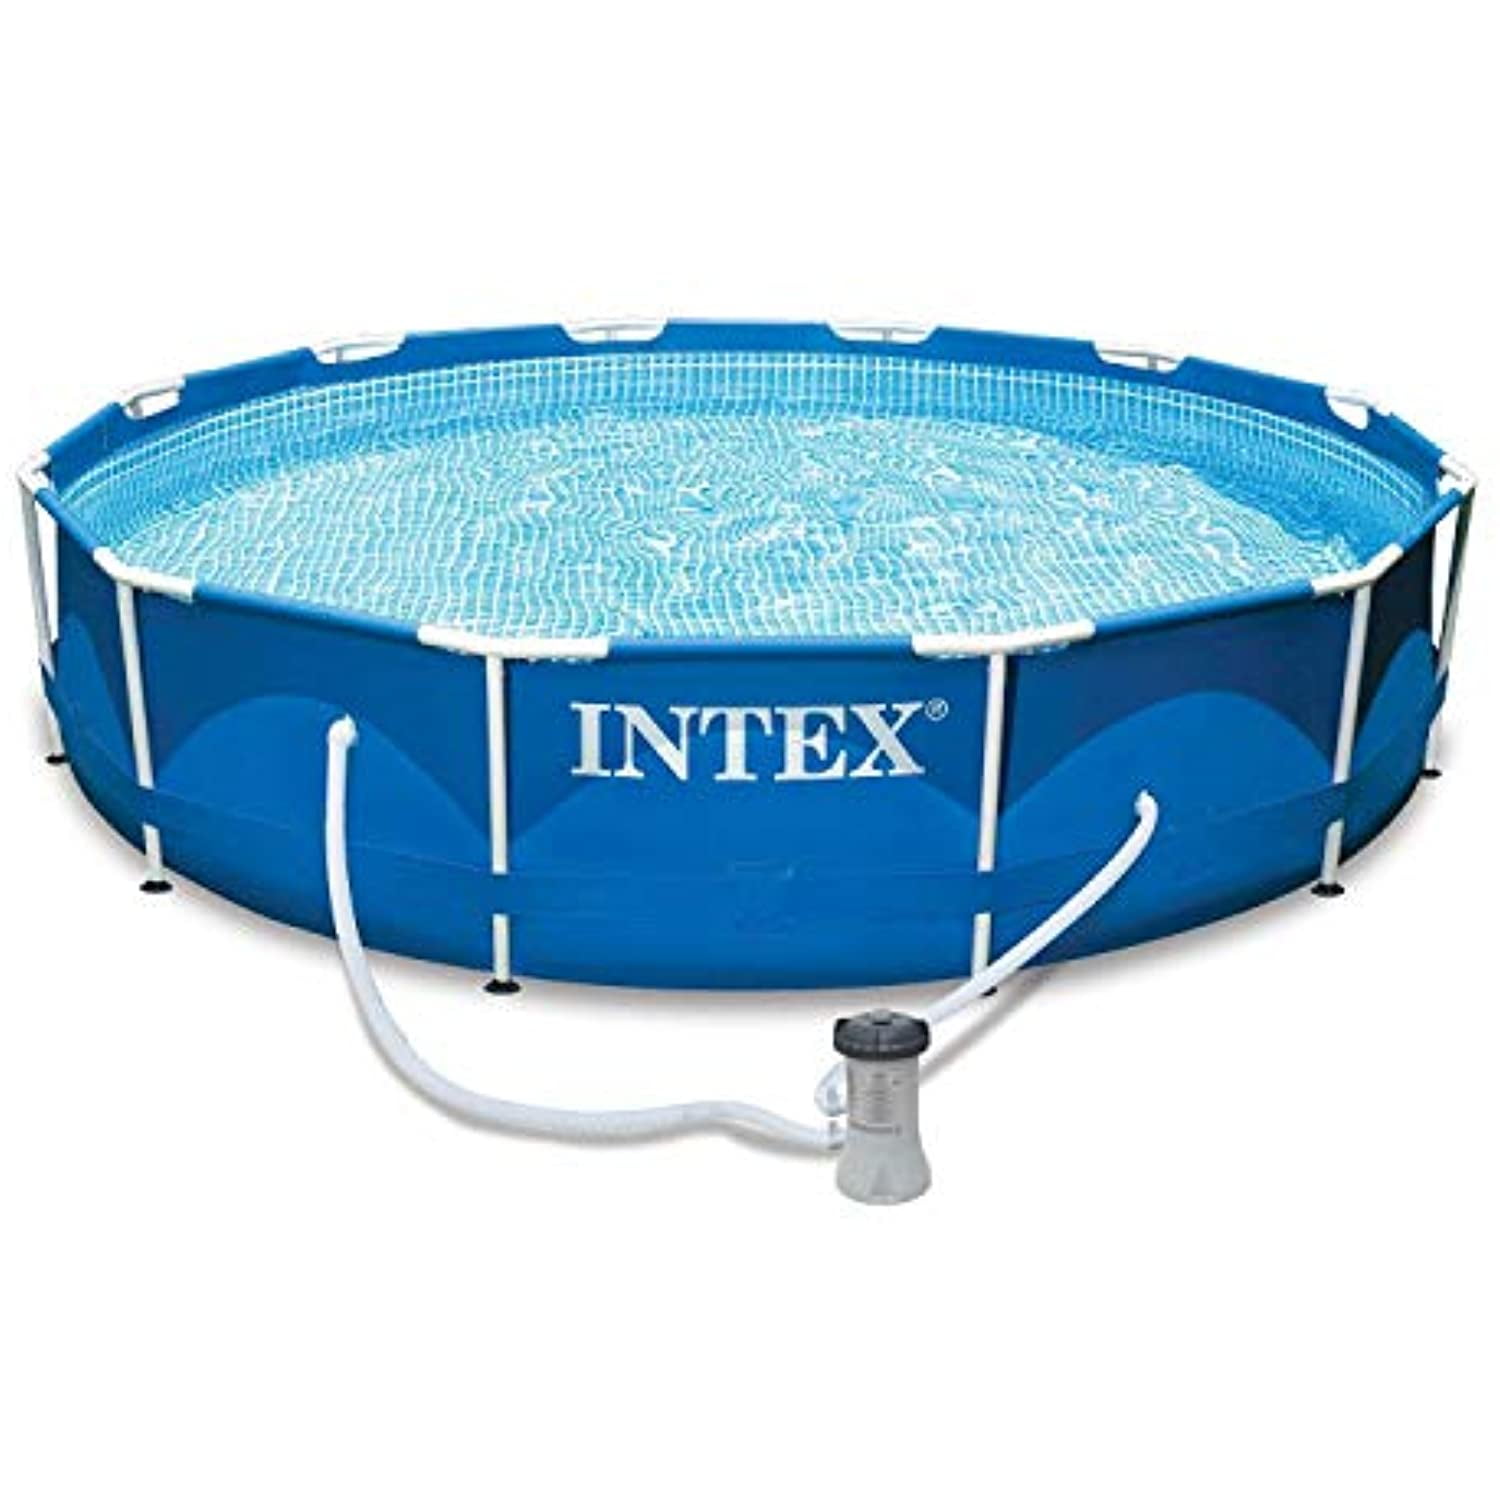 Intex 12 Ft x 30 Inches Metal Frame Set Above Ground Pool with Filter & - Walmart.com